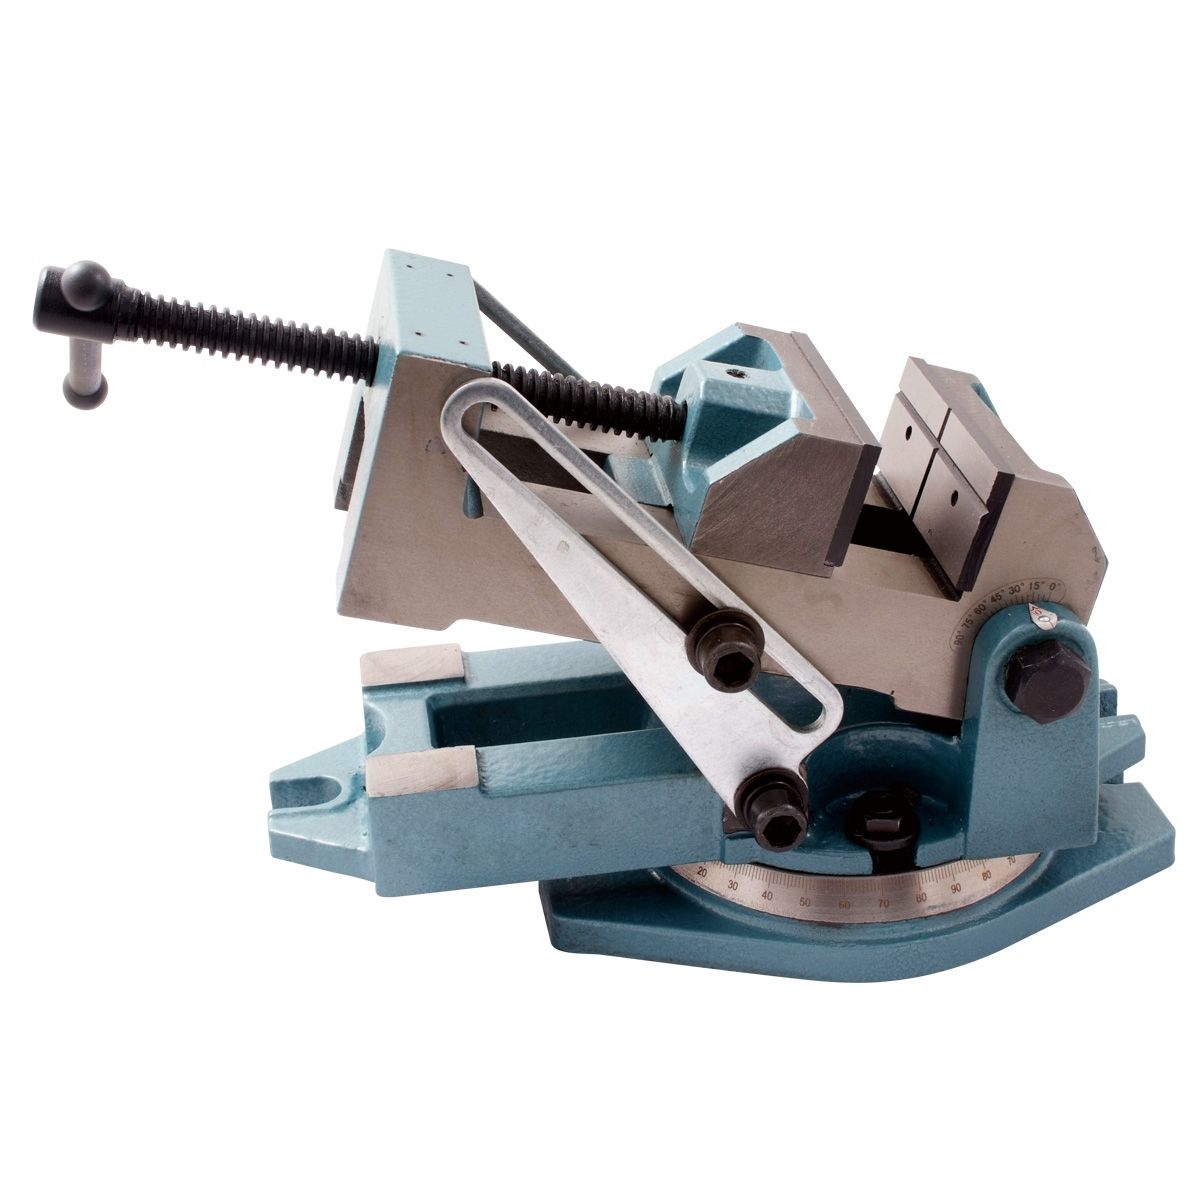 4" ANGLE DRILL PRESS VISE WITH SWIVEL BASE (3901-1735)